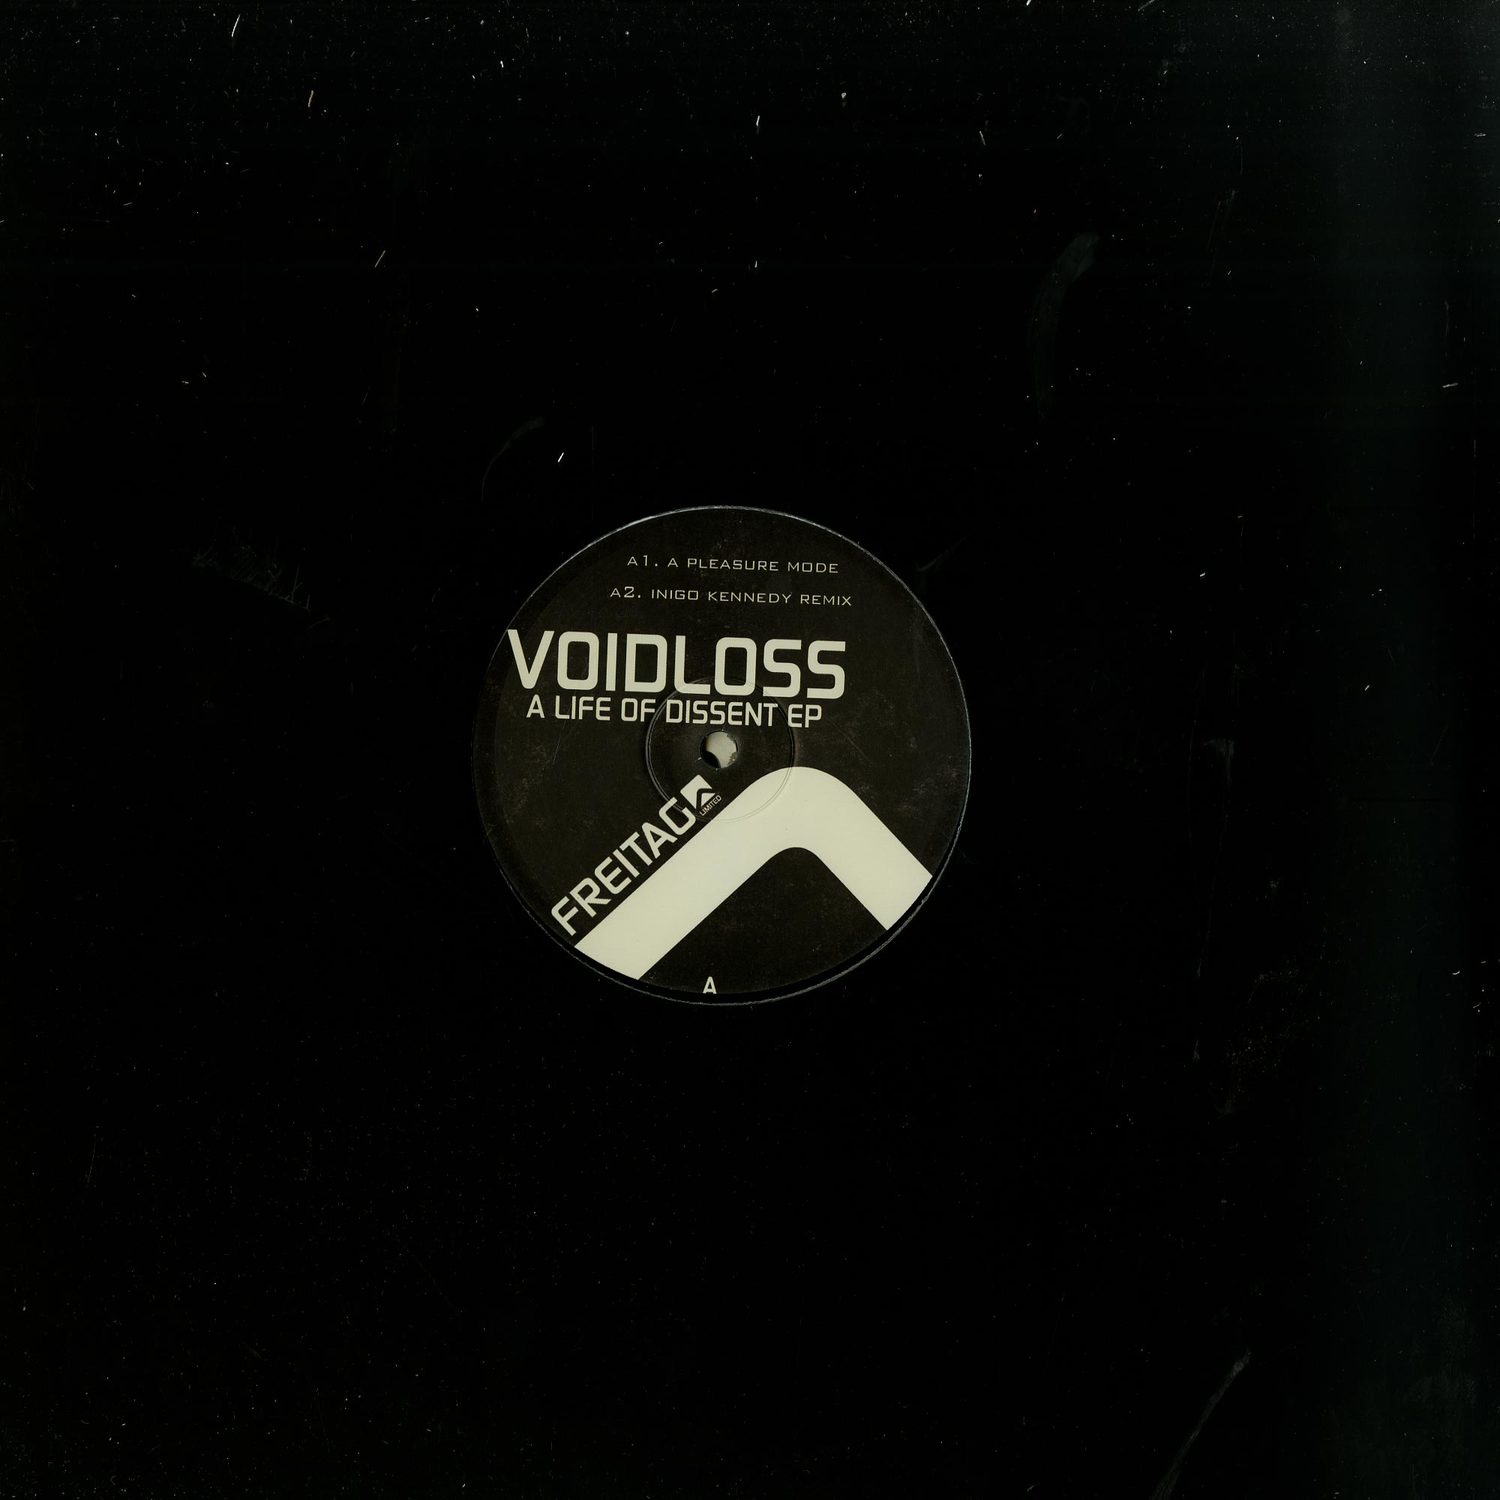 Voidloss - A LIFE OF DISSENT EP 